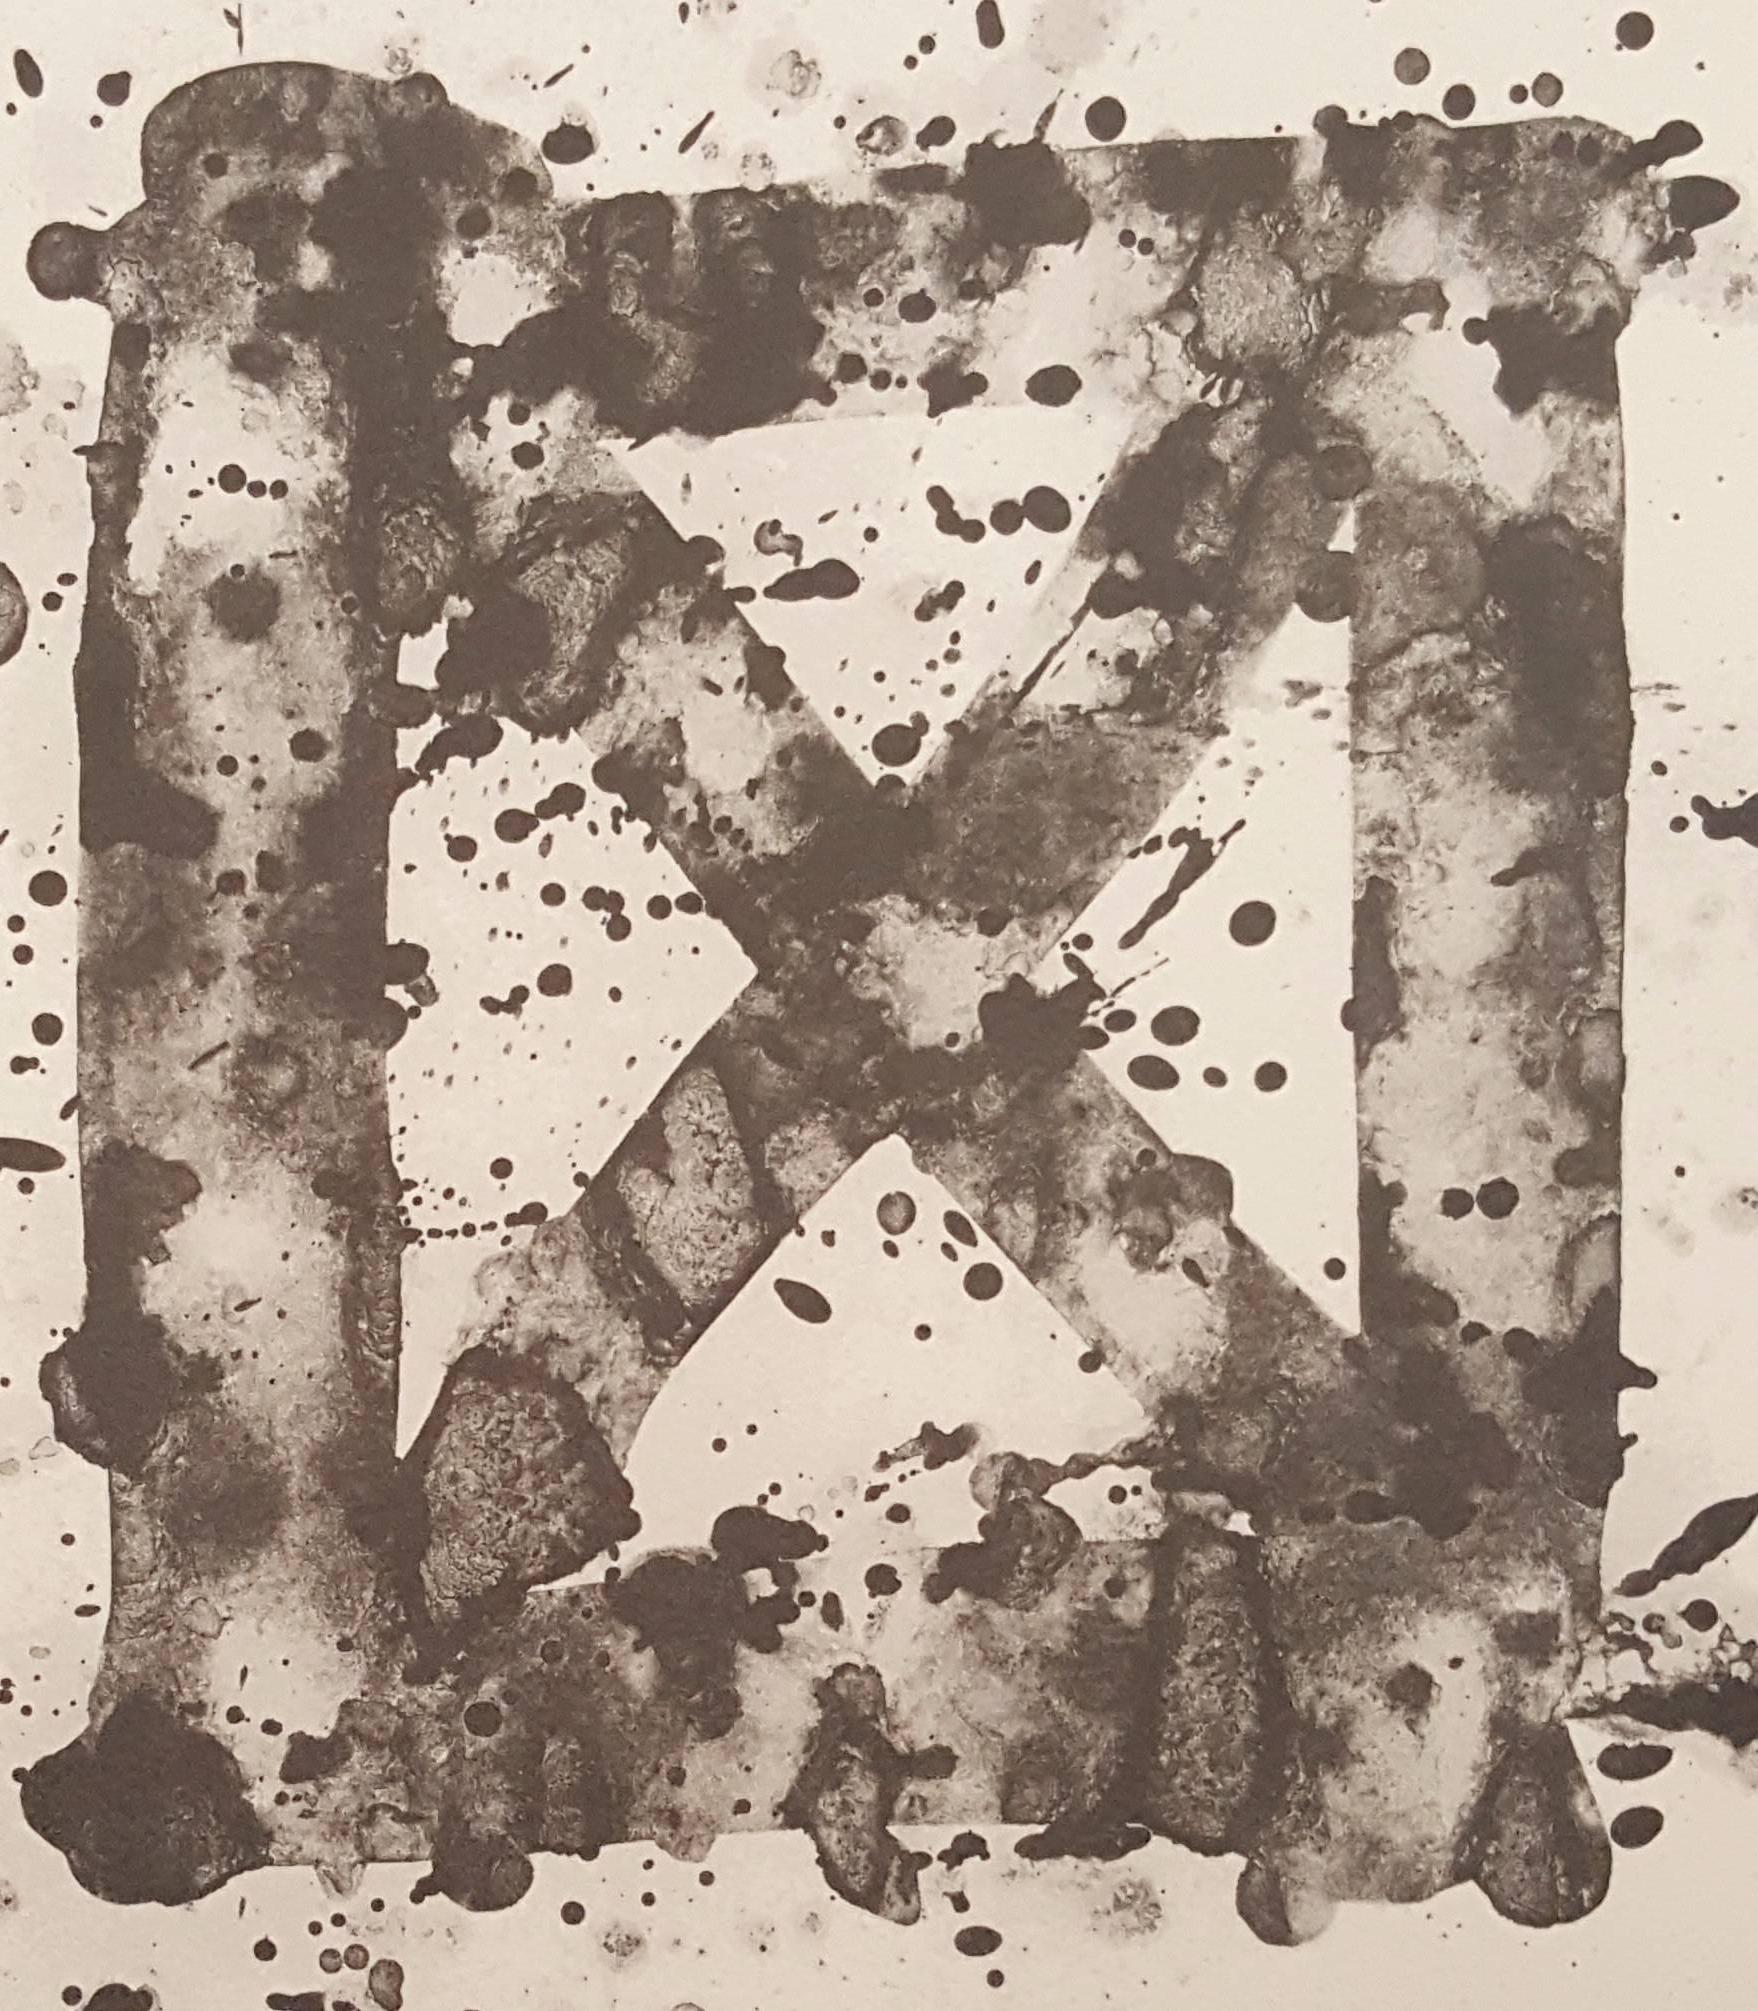 Composition - Lithograph  - Print by Sam Francis